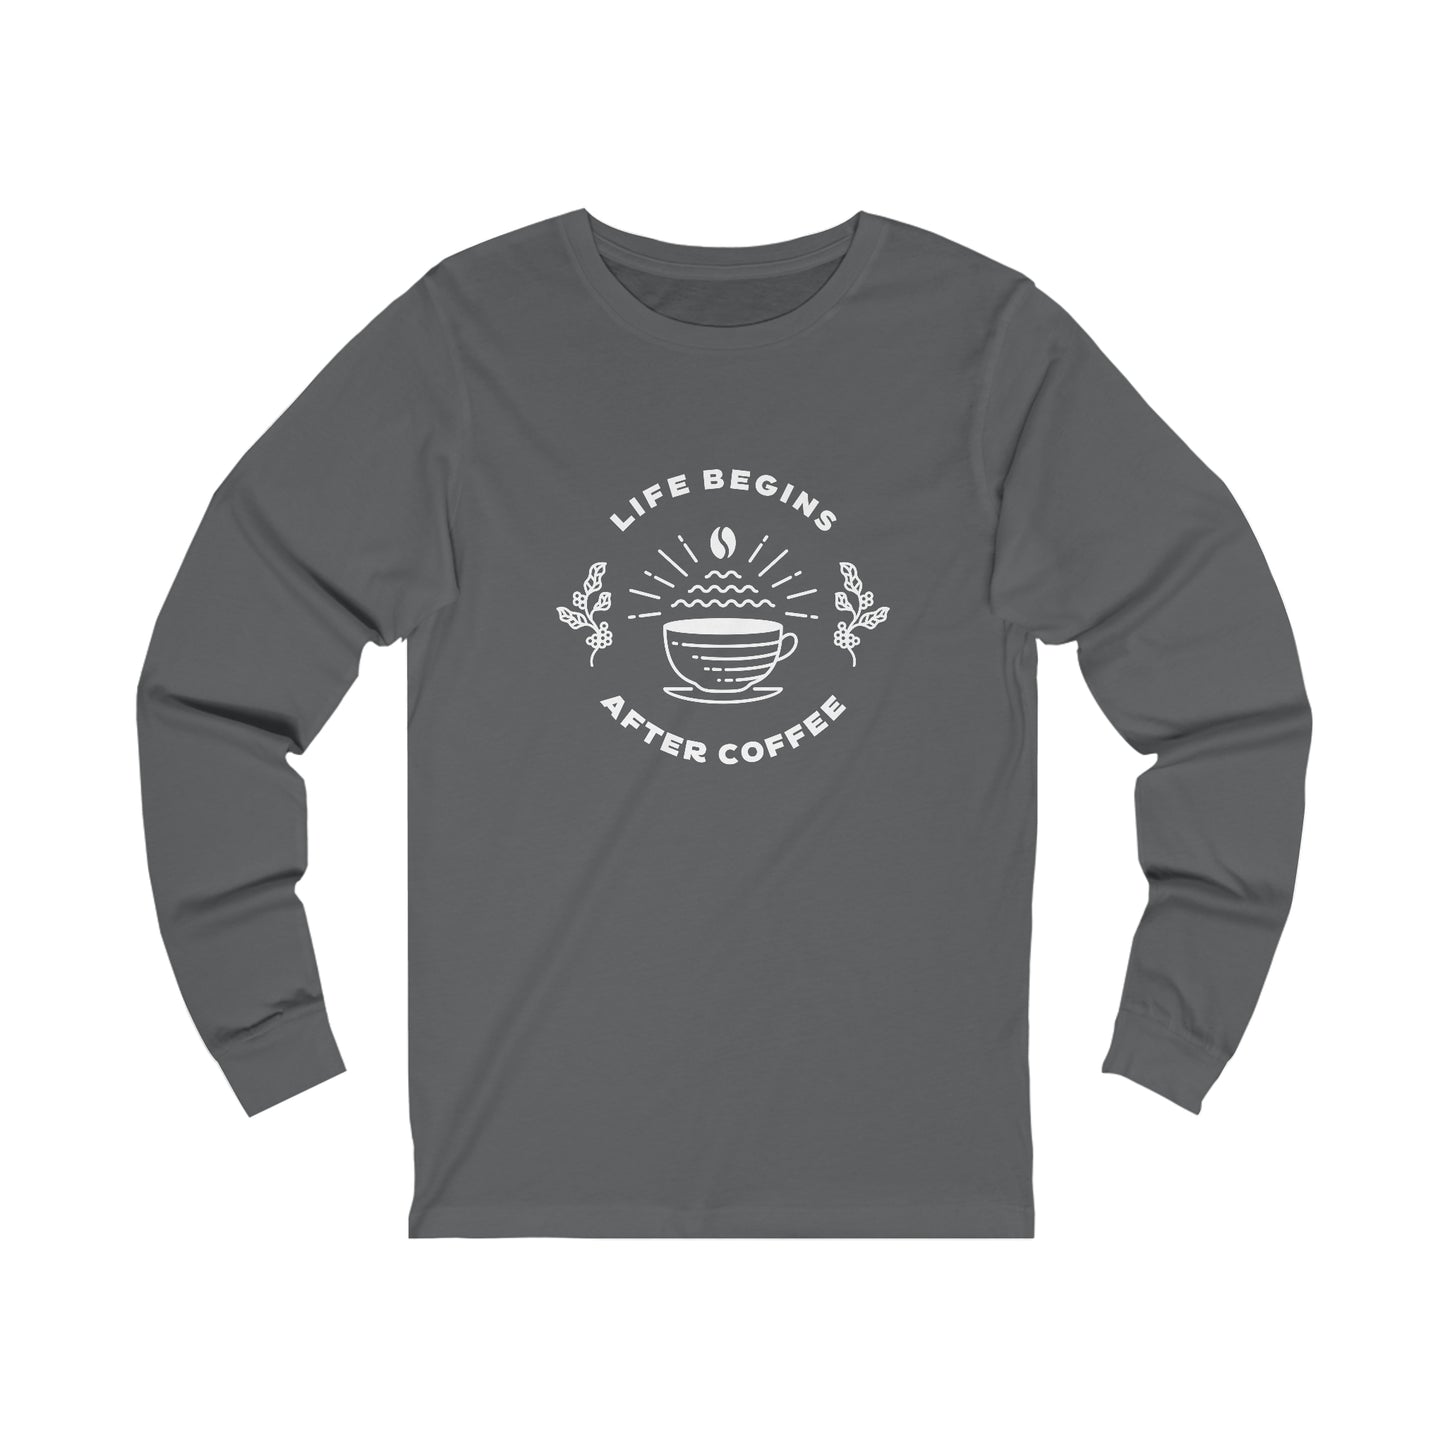 Life Begins After Coffee. Unisex Jersey Long Sleeve Tee